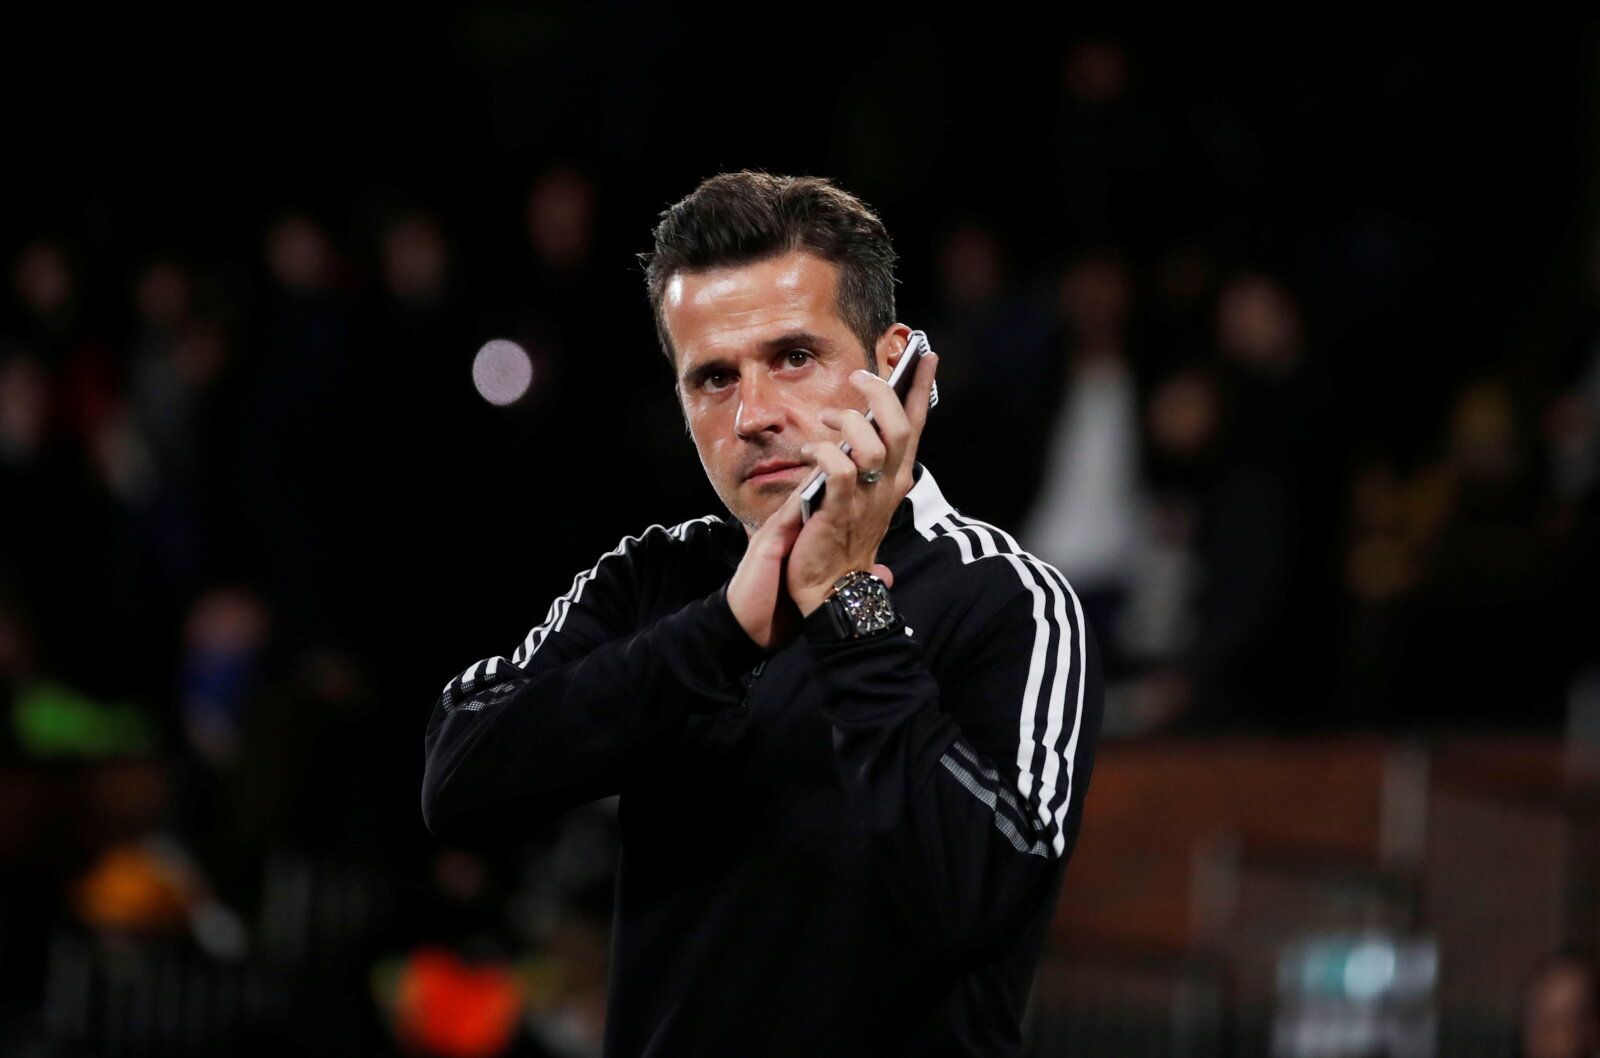 Soccer Football - Championship - Fulham v Cardiff City - Craven Cottage, London, Britain - October 20, 2021 Fulham manager Marco Silva  Action Images/Peter Cziborra  EDITORIAL USE ONLY. No use with unauthorized audio, video, data, fixture lists, club/league logos or 